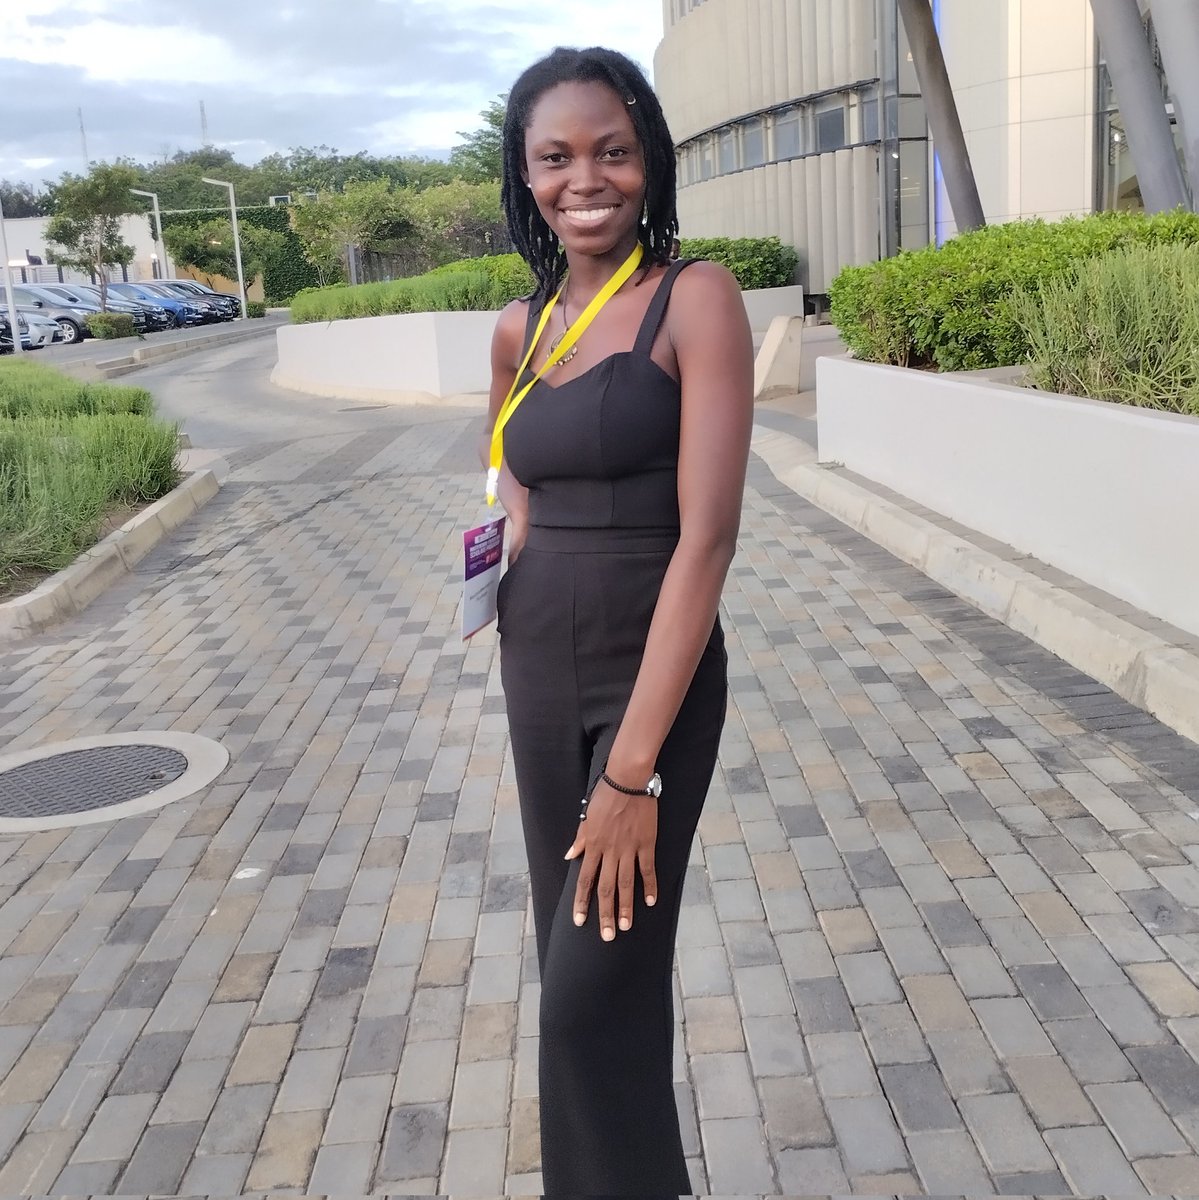 #NewProfilePic #CamfedScholar #Globalcitizen #changemaker ... The turbulence will come, but the ability to remain still and resilient is what makes you much stronger after every storm of life